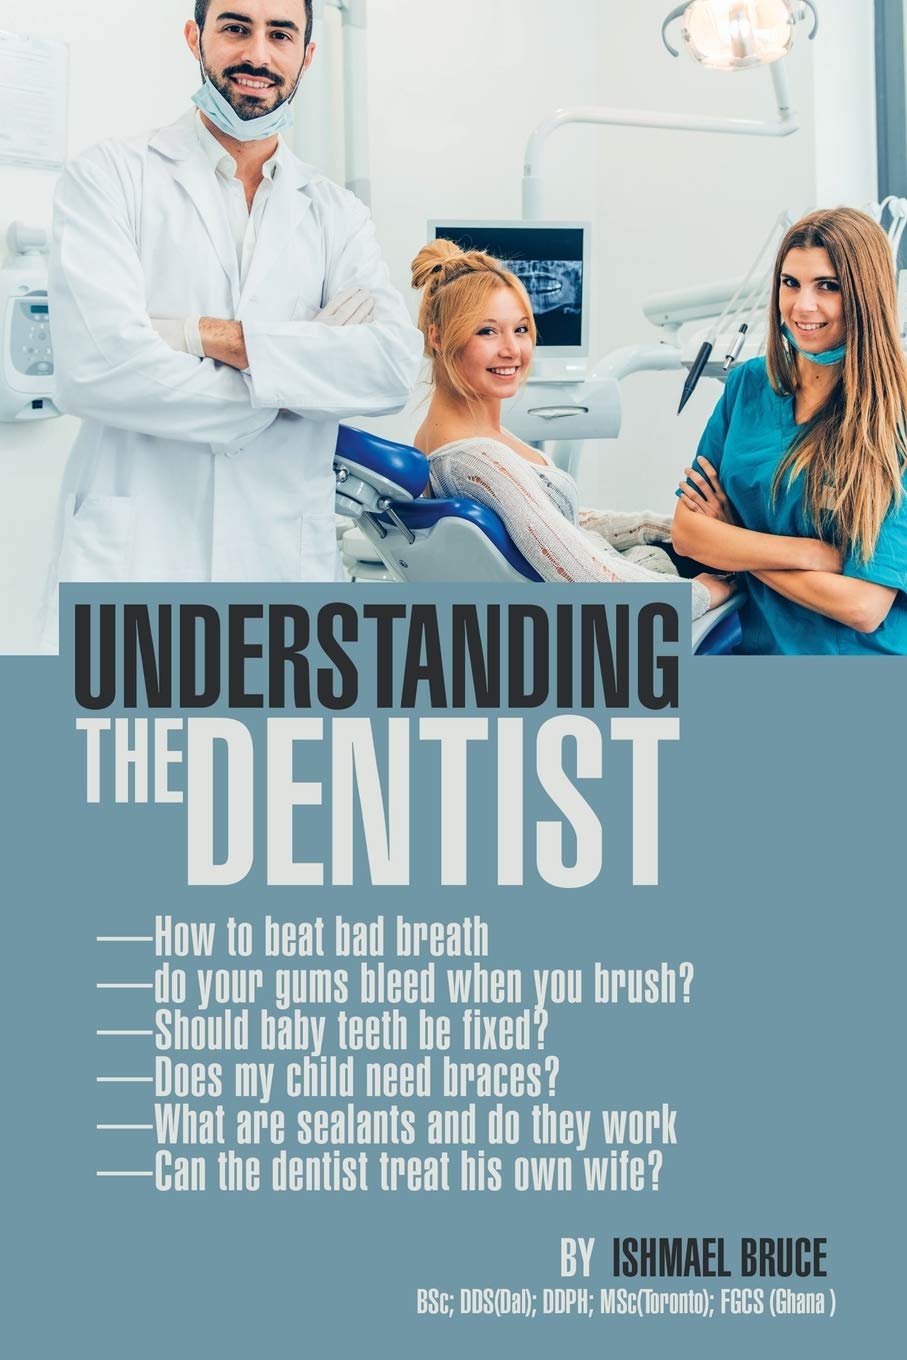 Author's Tranquility Press proudly presents "Understanding the Dentist" by Ishmael Bruce 